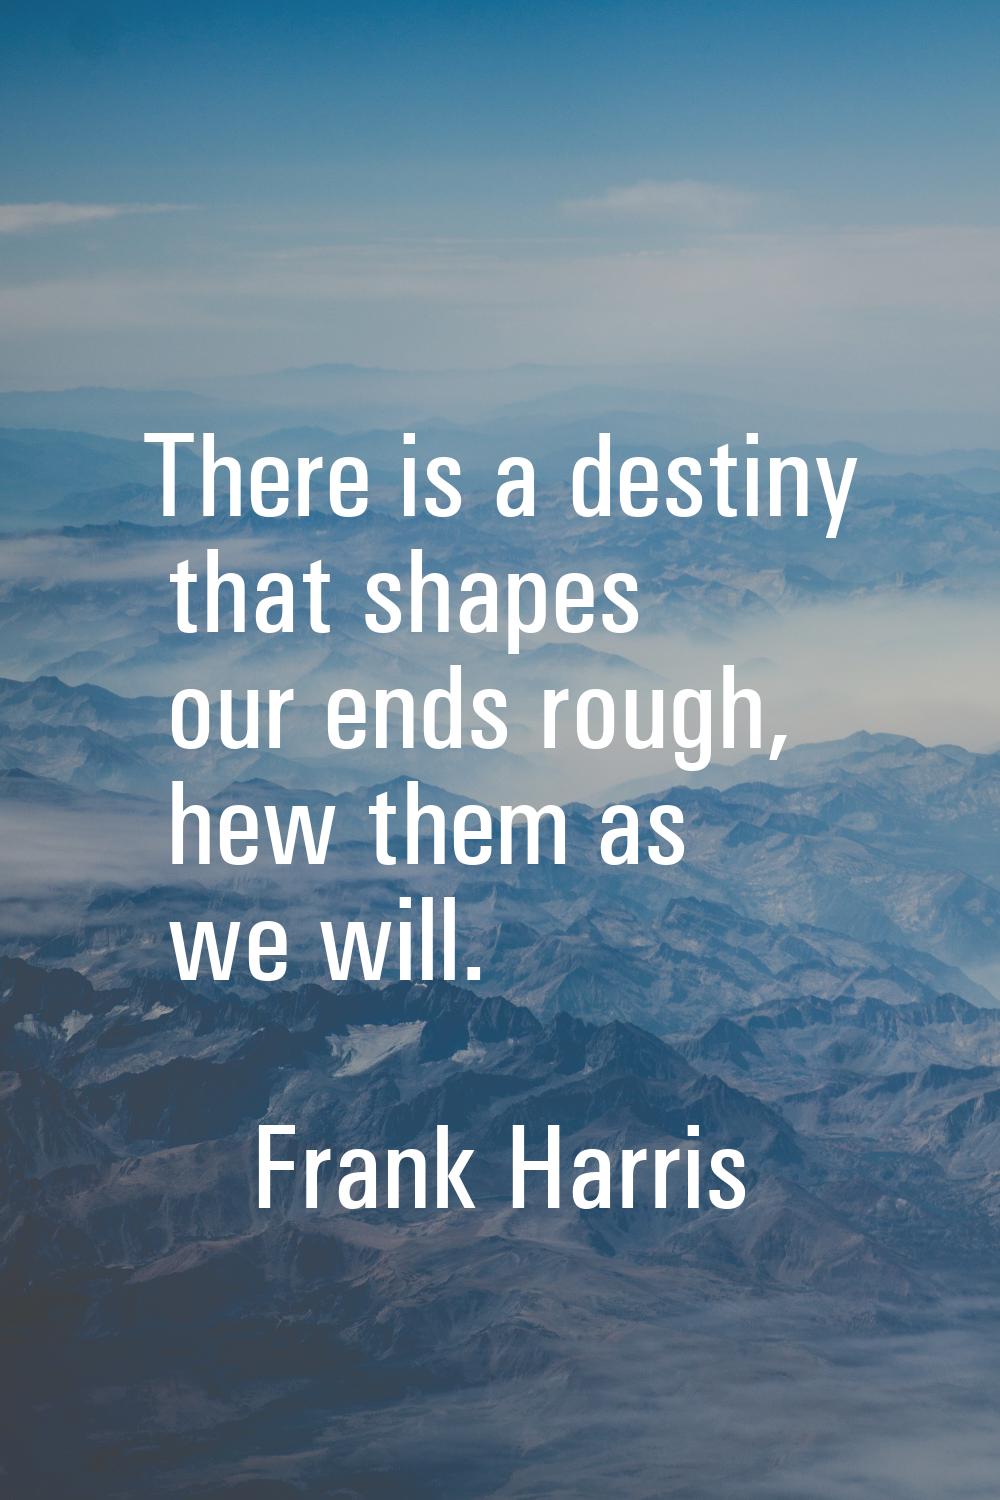 There is a destiny that shapes our ends rough, hew them as we will.